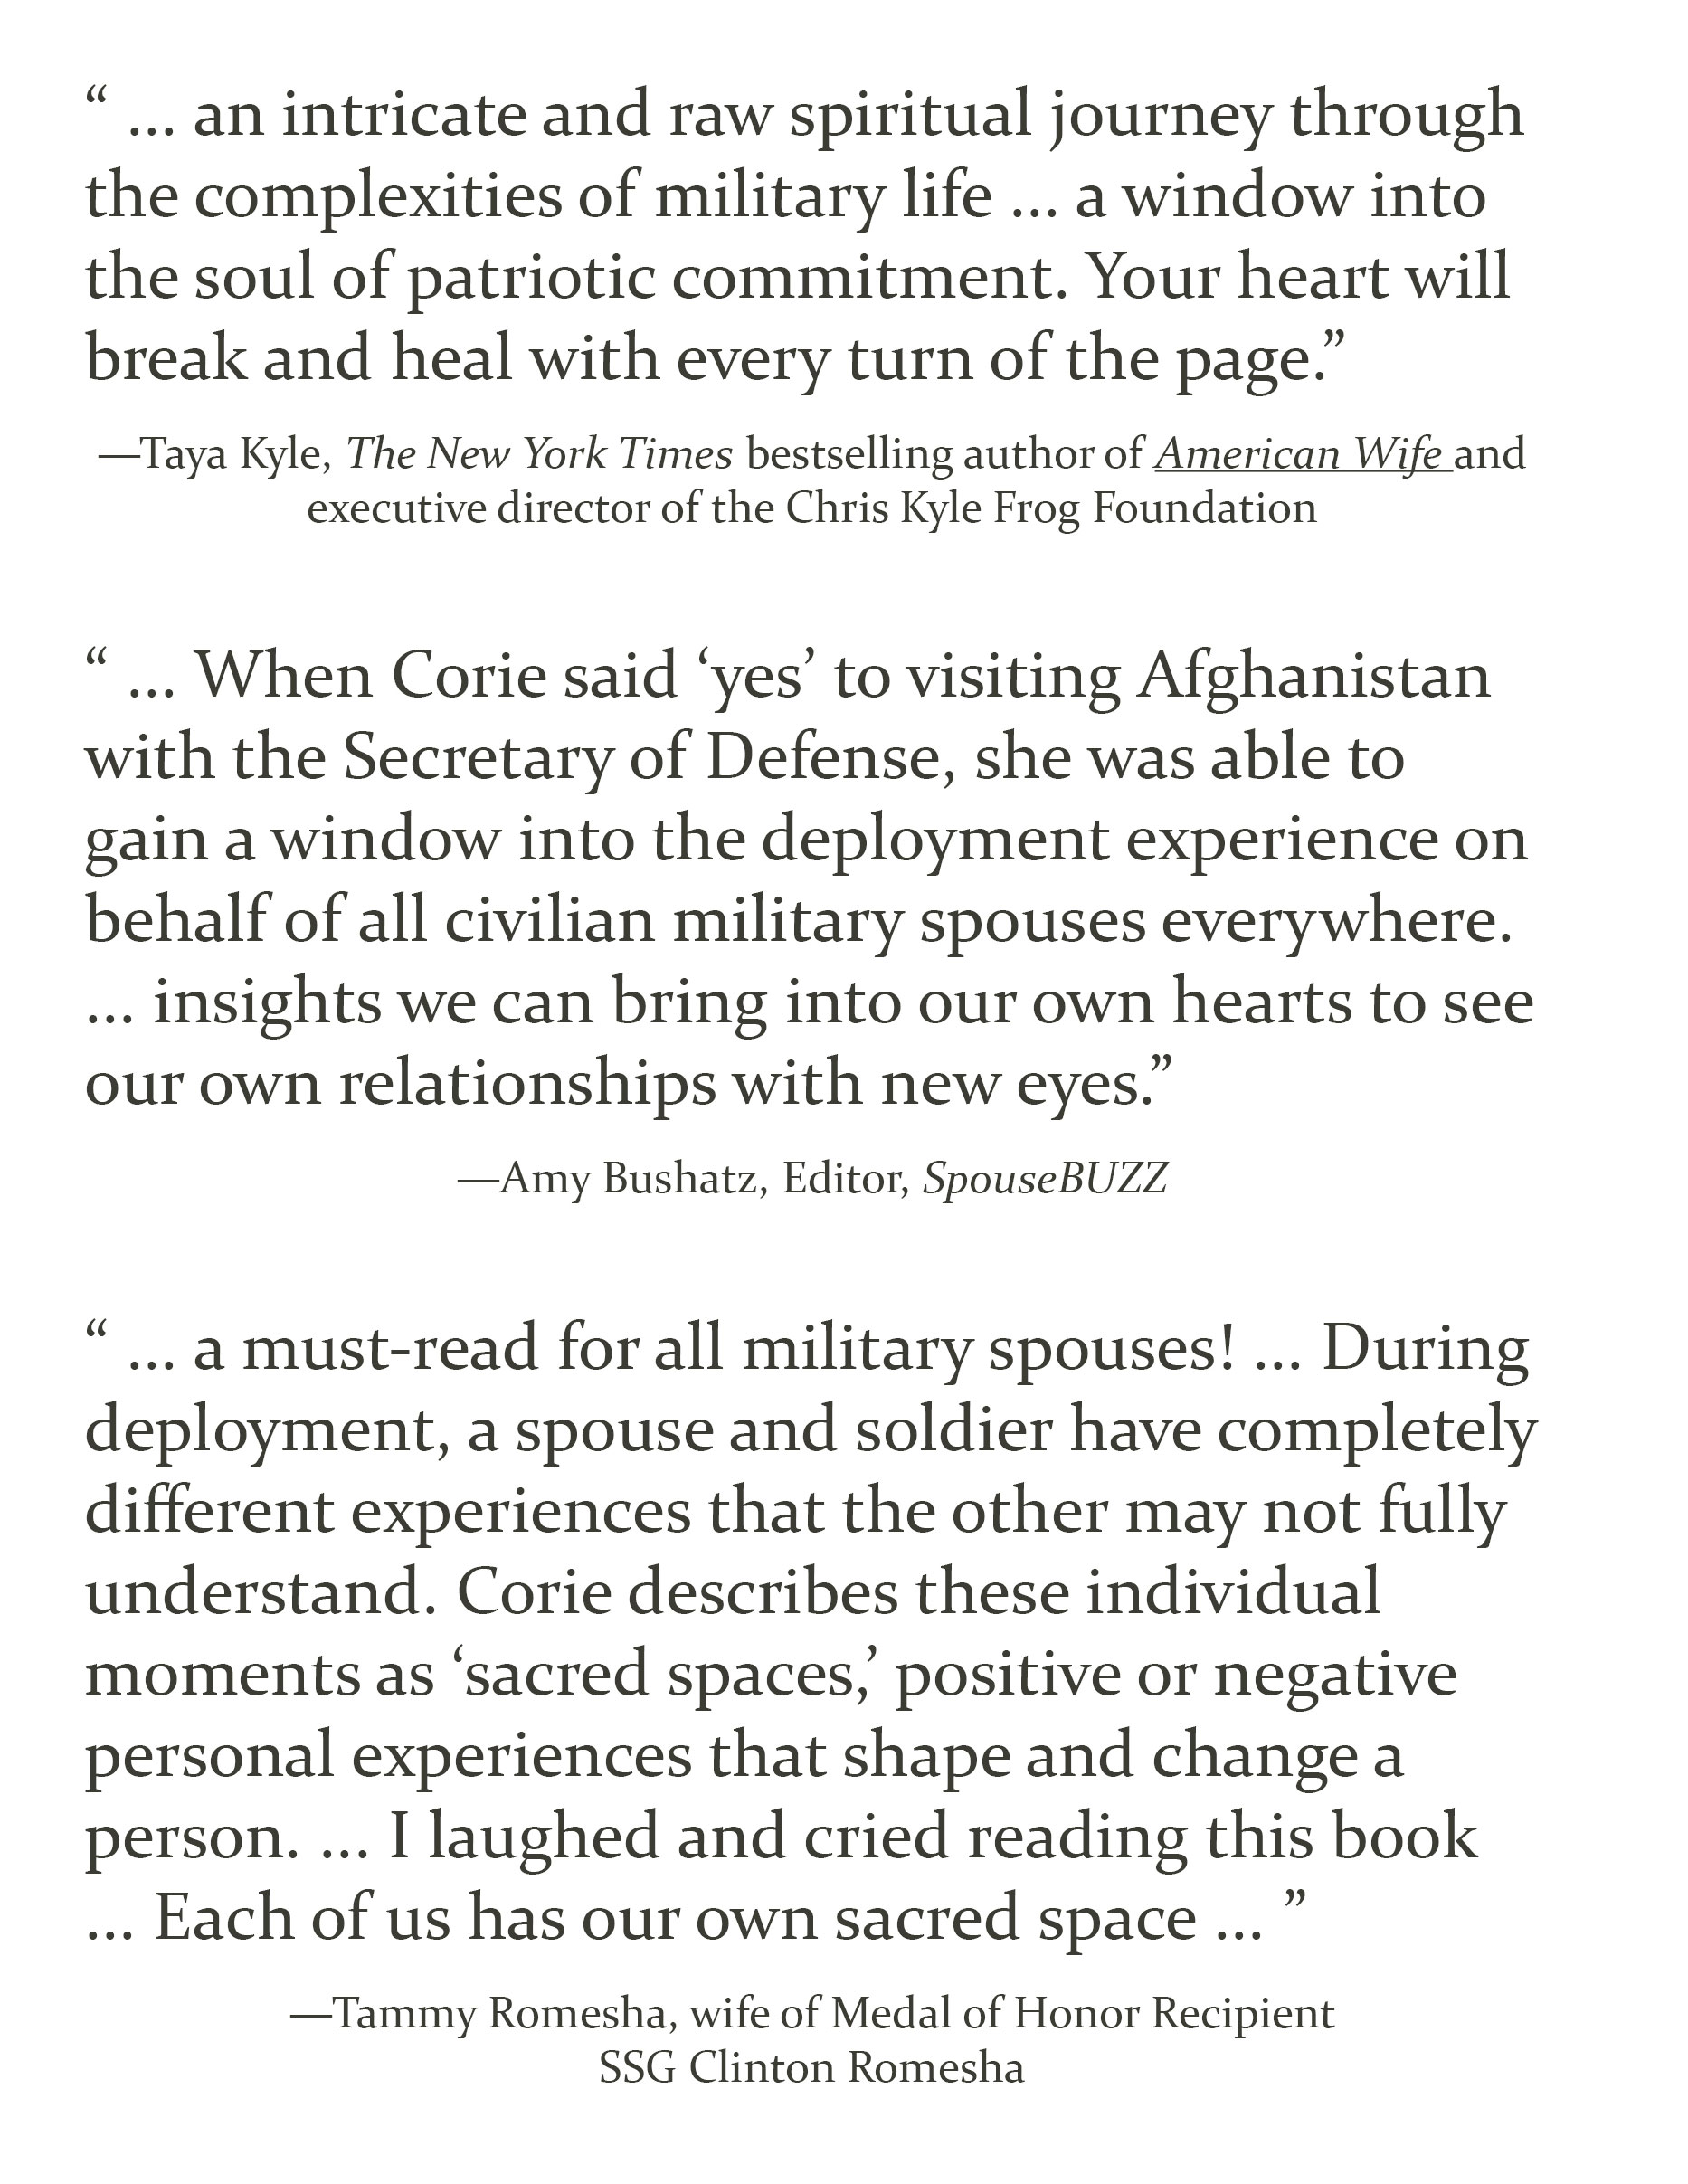 Reviews for Sacred Spaces: My journey to the heart of military marriage by Corie Weathers